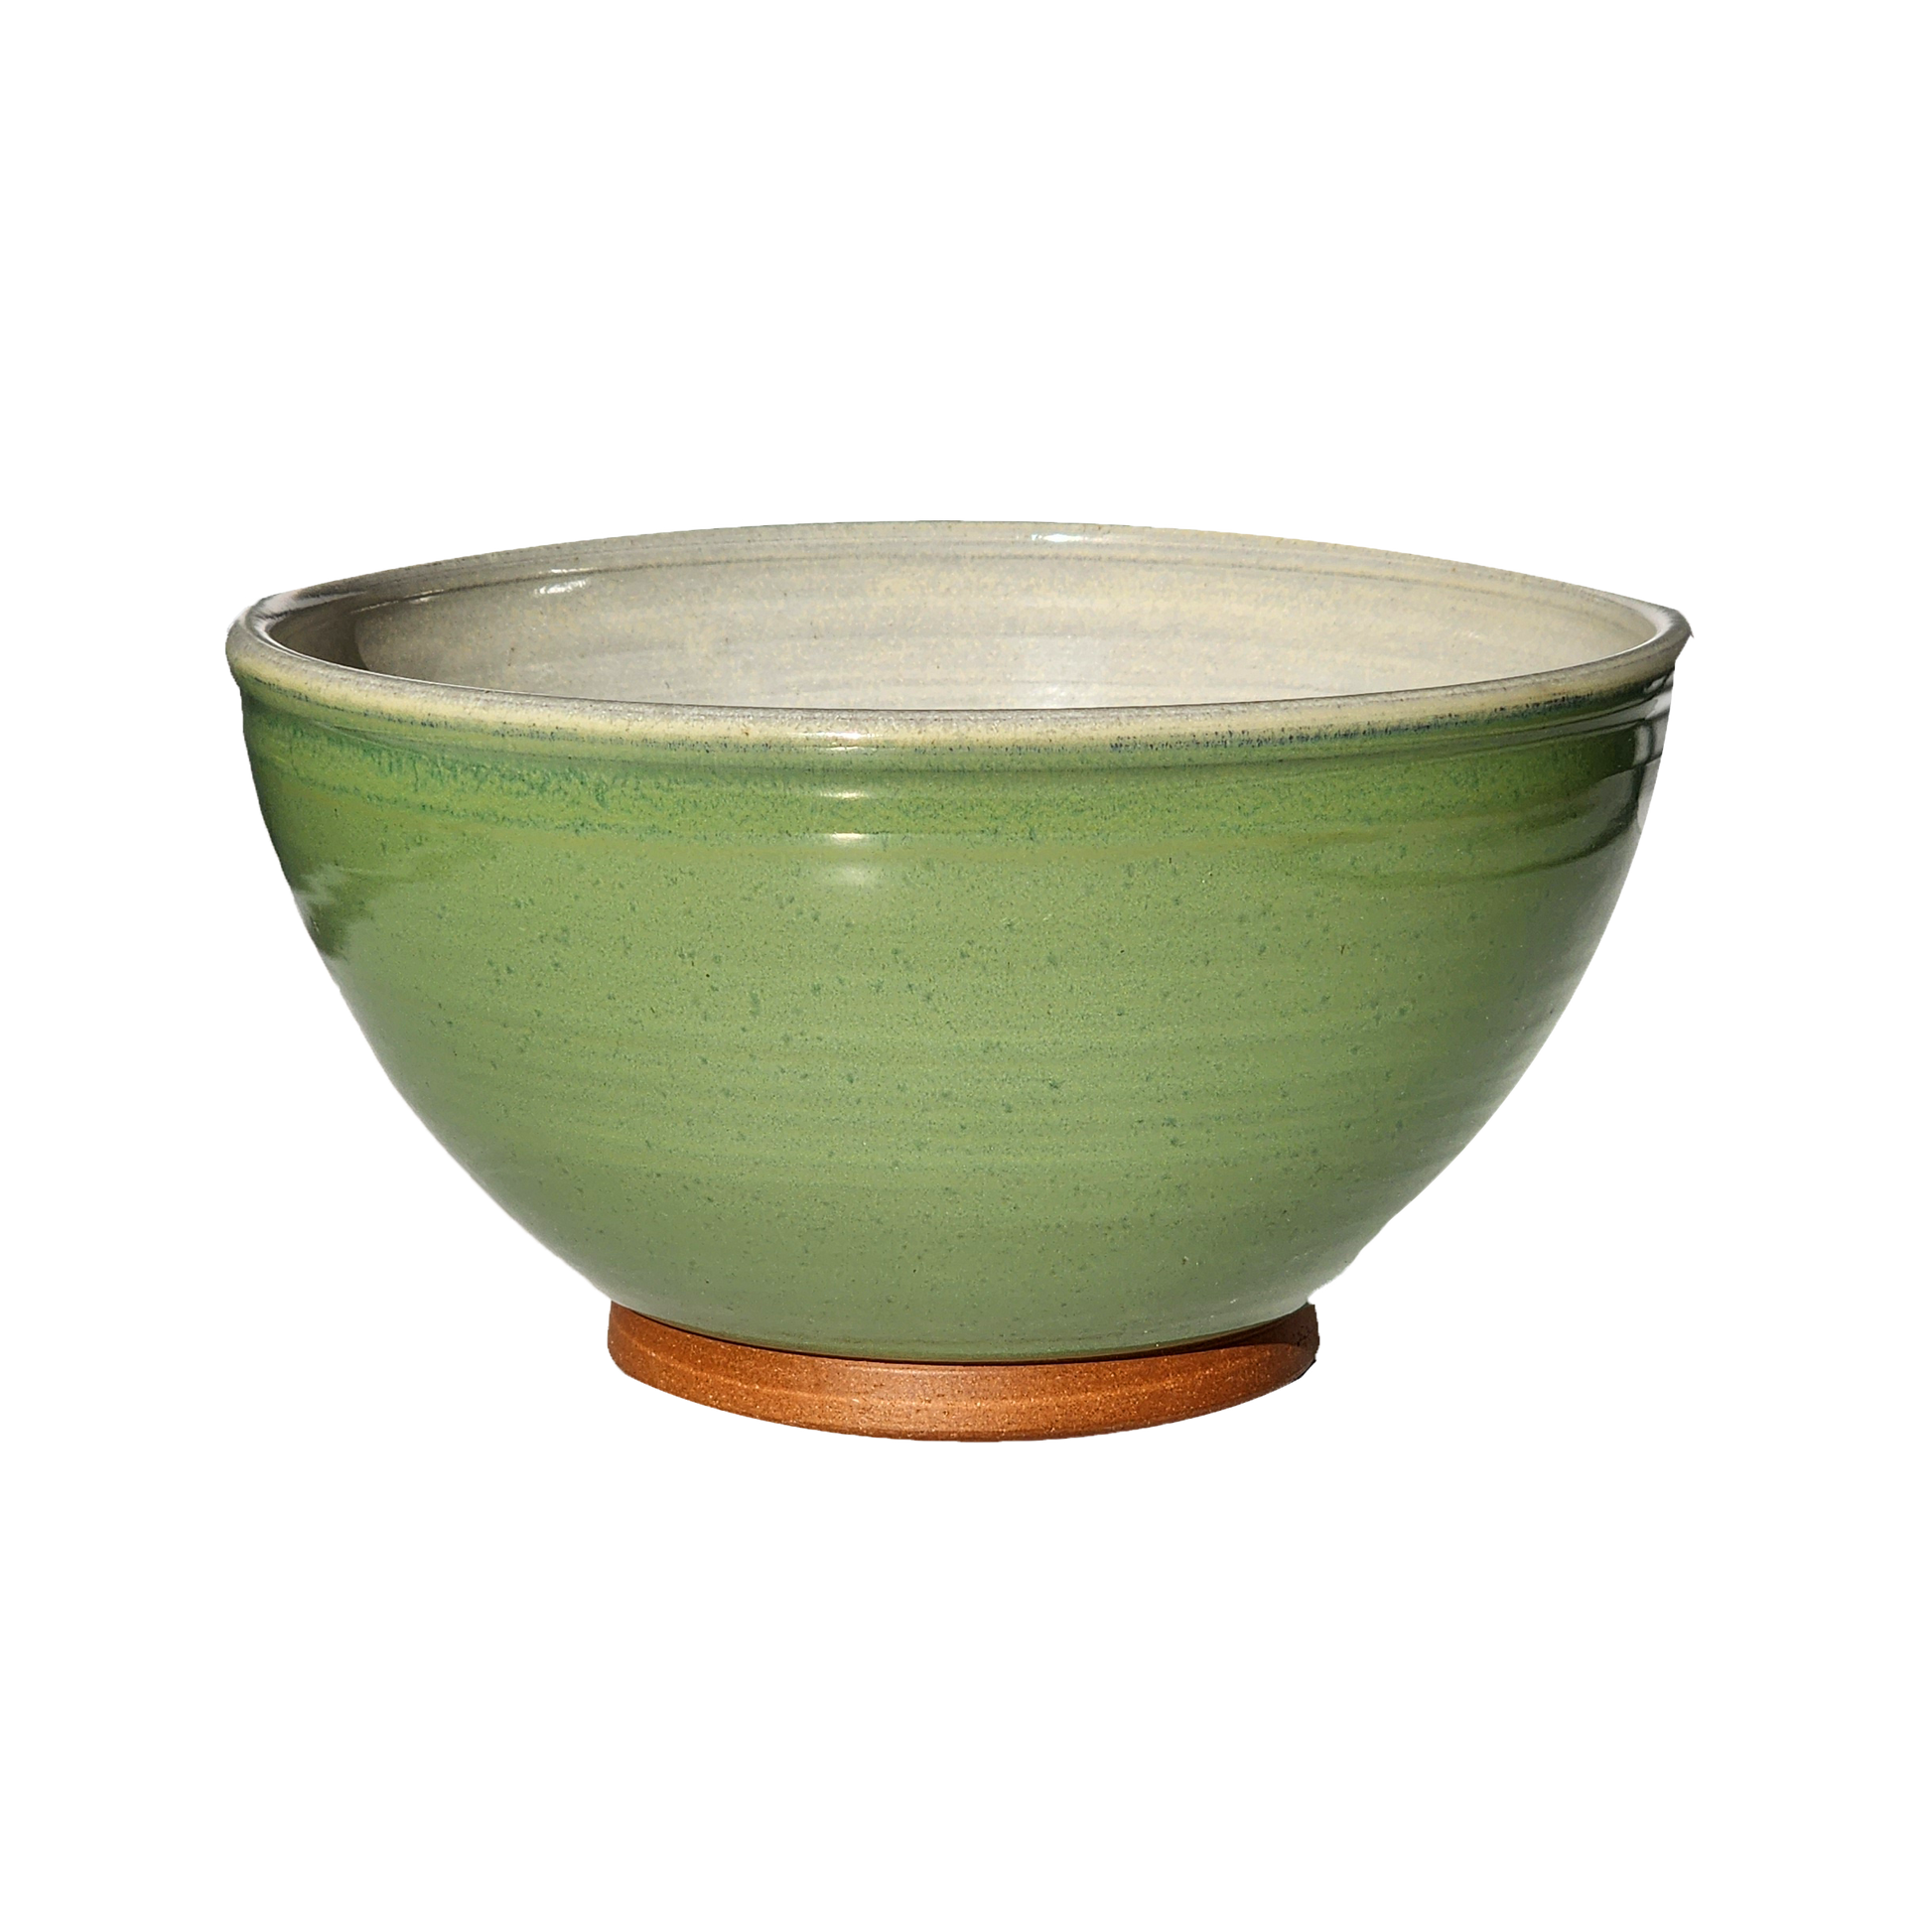  Image: A large mixing bowl in bud green, offering a capacity of 12.5 cups. The soothing green hue evokes images of fresh spring foliage, making it a delightful addition to any kitchen. Ideal for mixing ingredients for your favorite recipes.